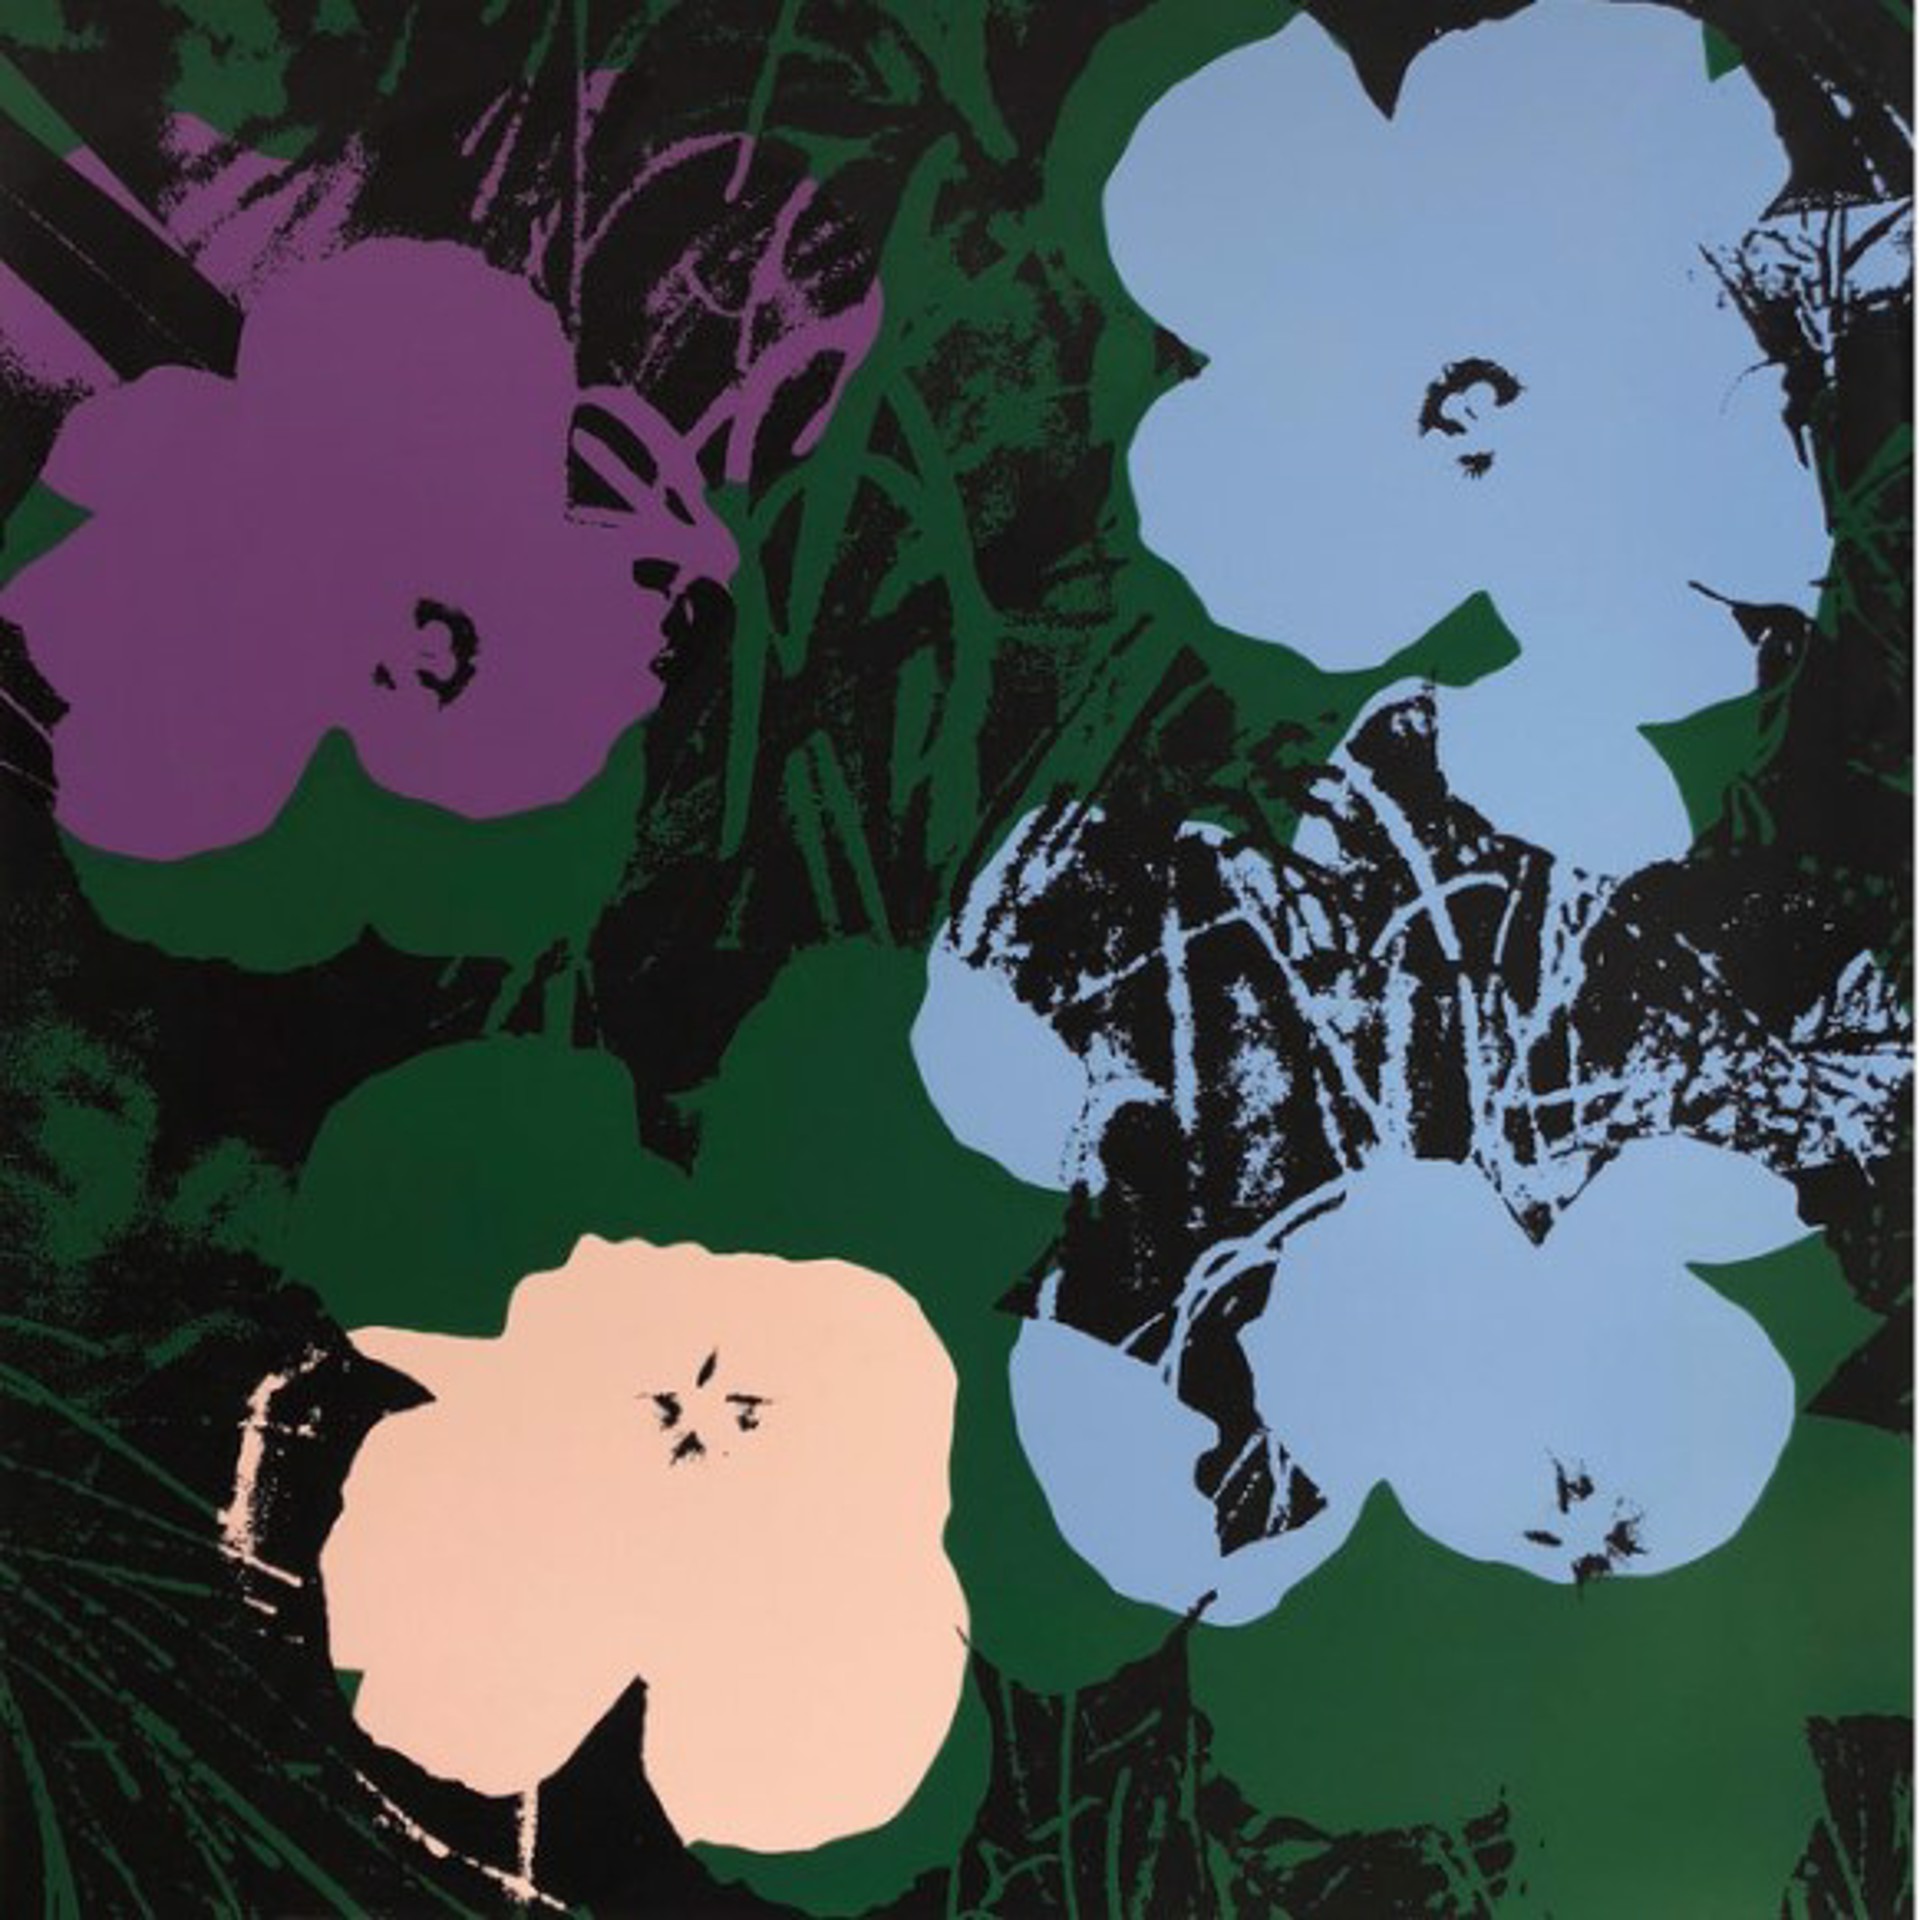 Flowers 11.64 From the Sunday B. Morning Edition by Andy Warhol (1928 - 1987)